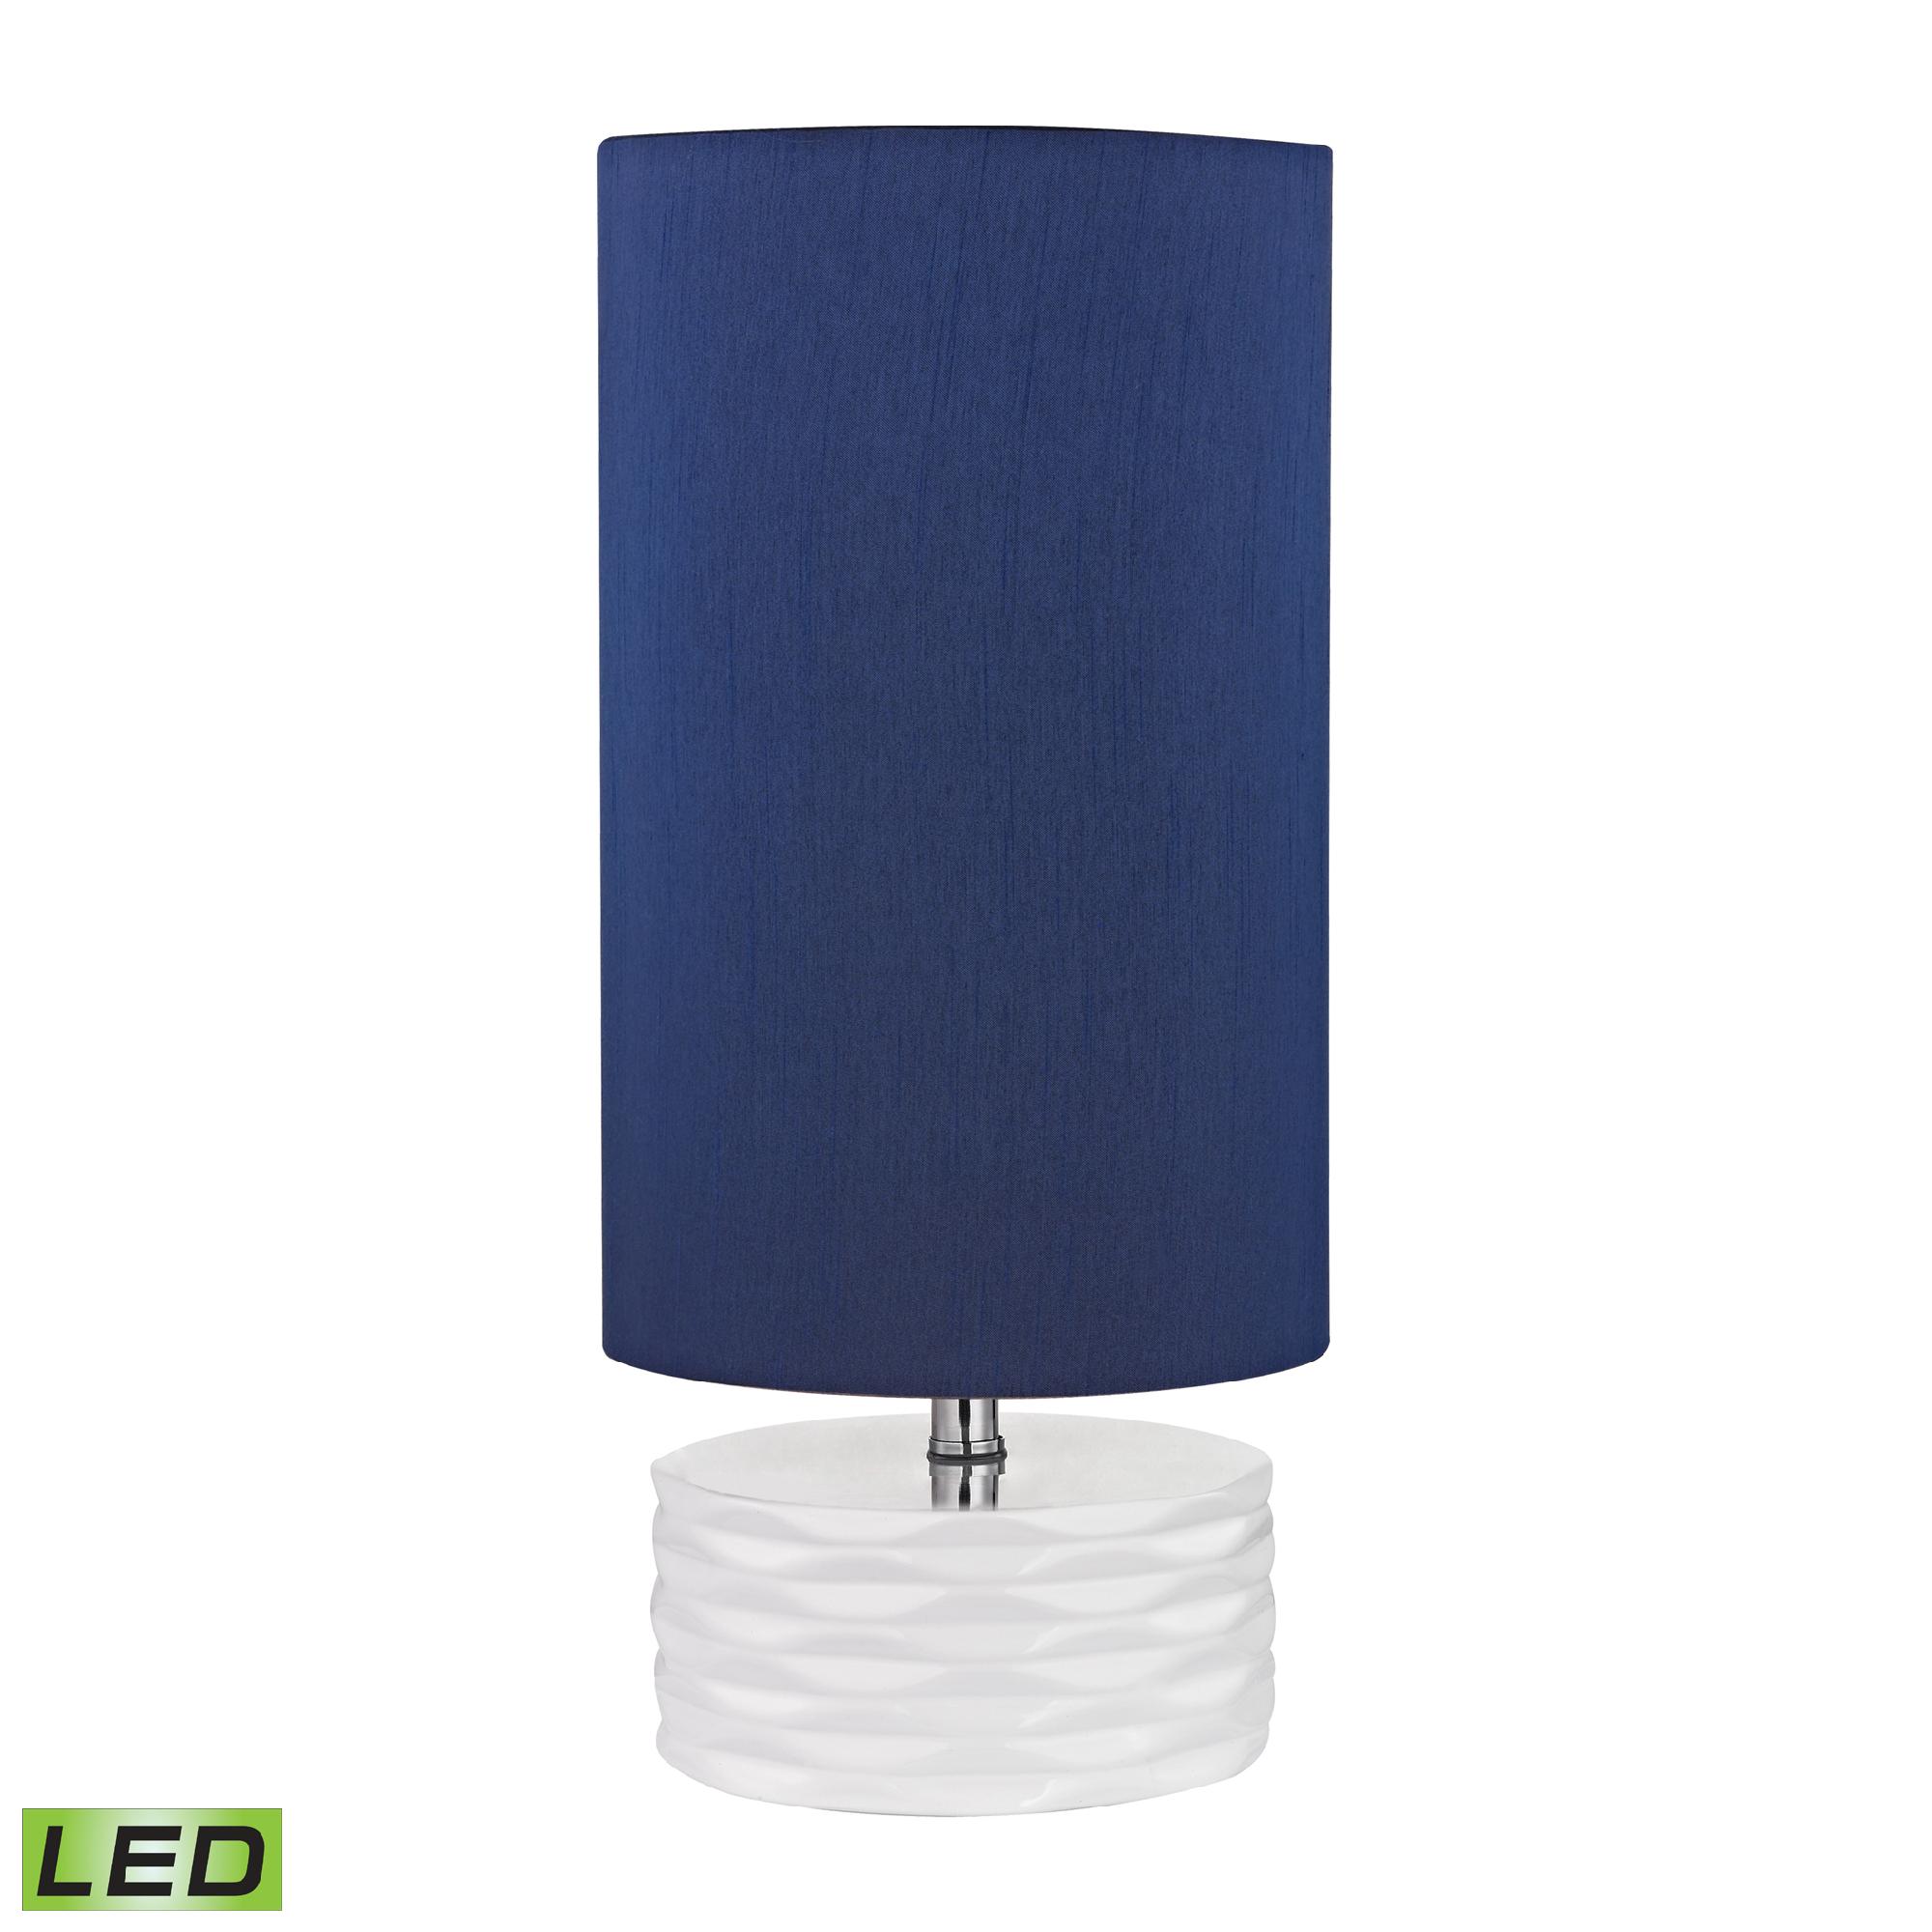 Dimond Tamworth White Ceramic Accent Lamp With Blue Shade - LED